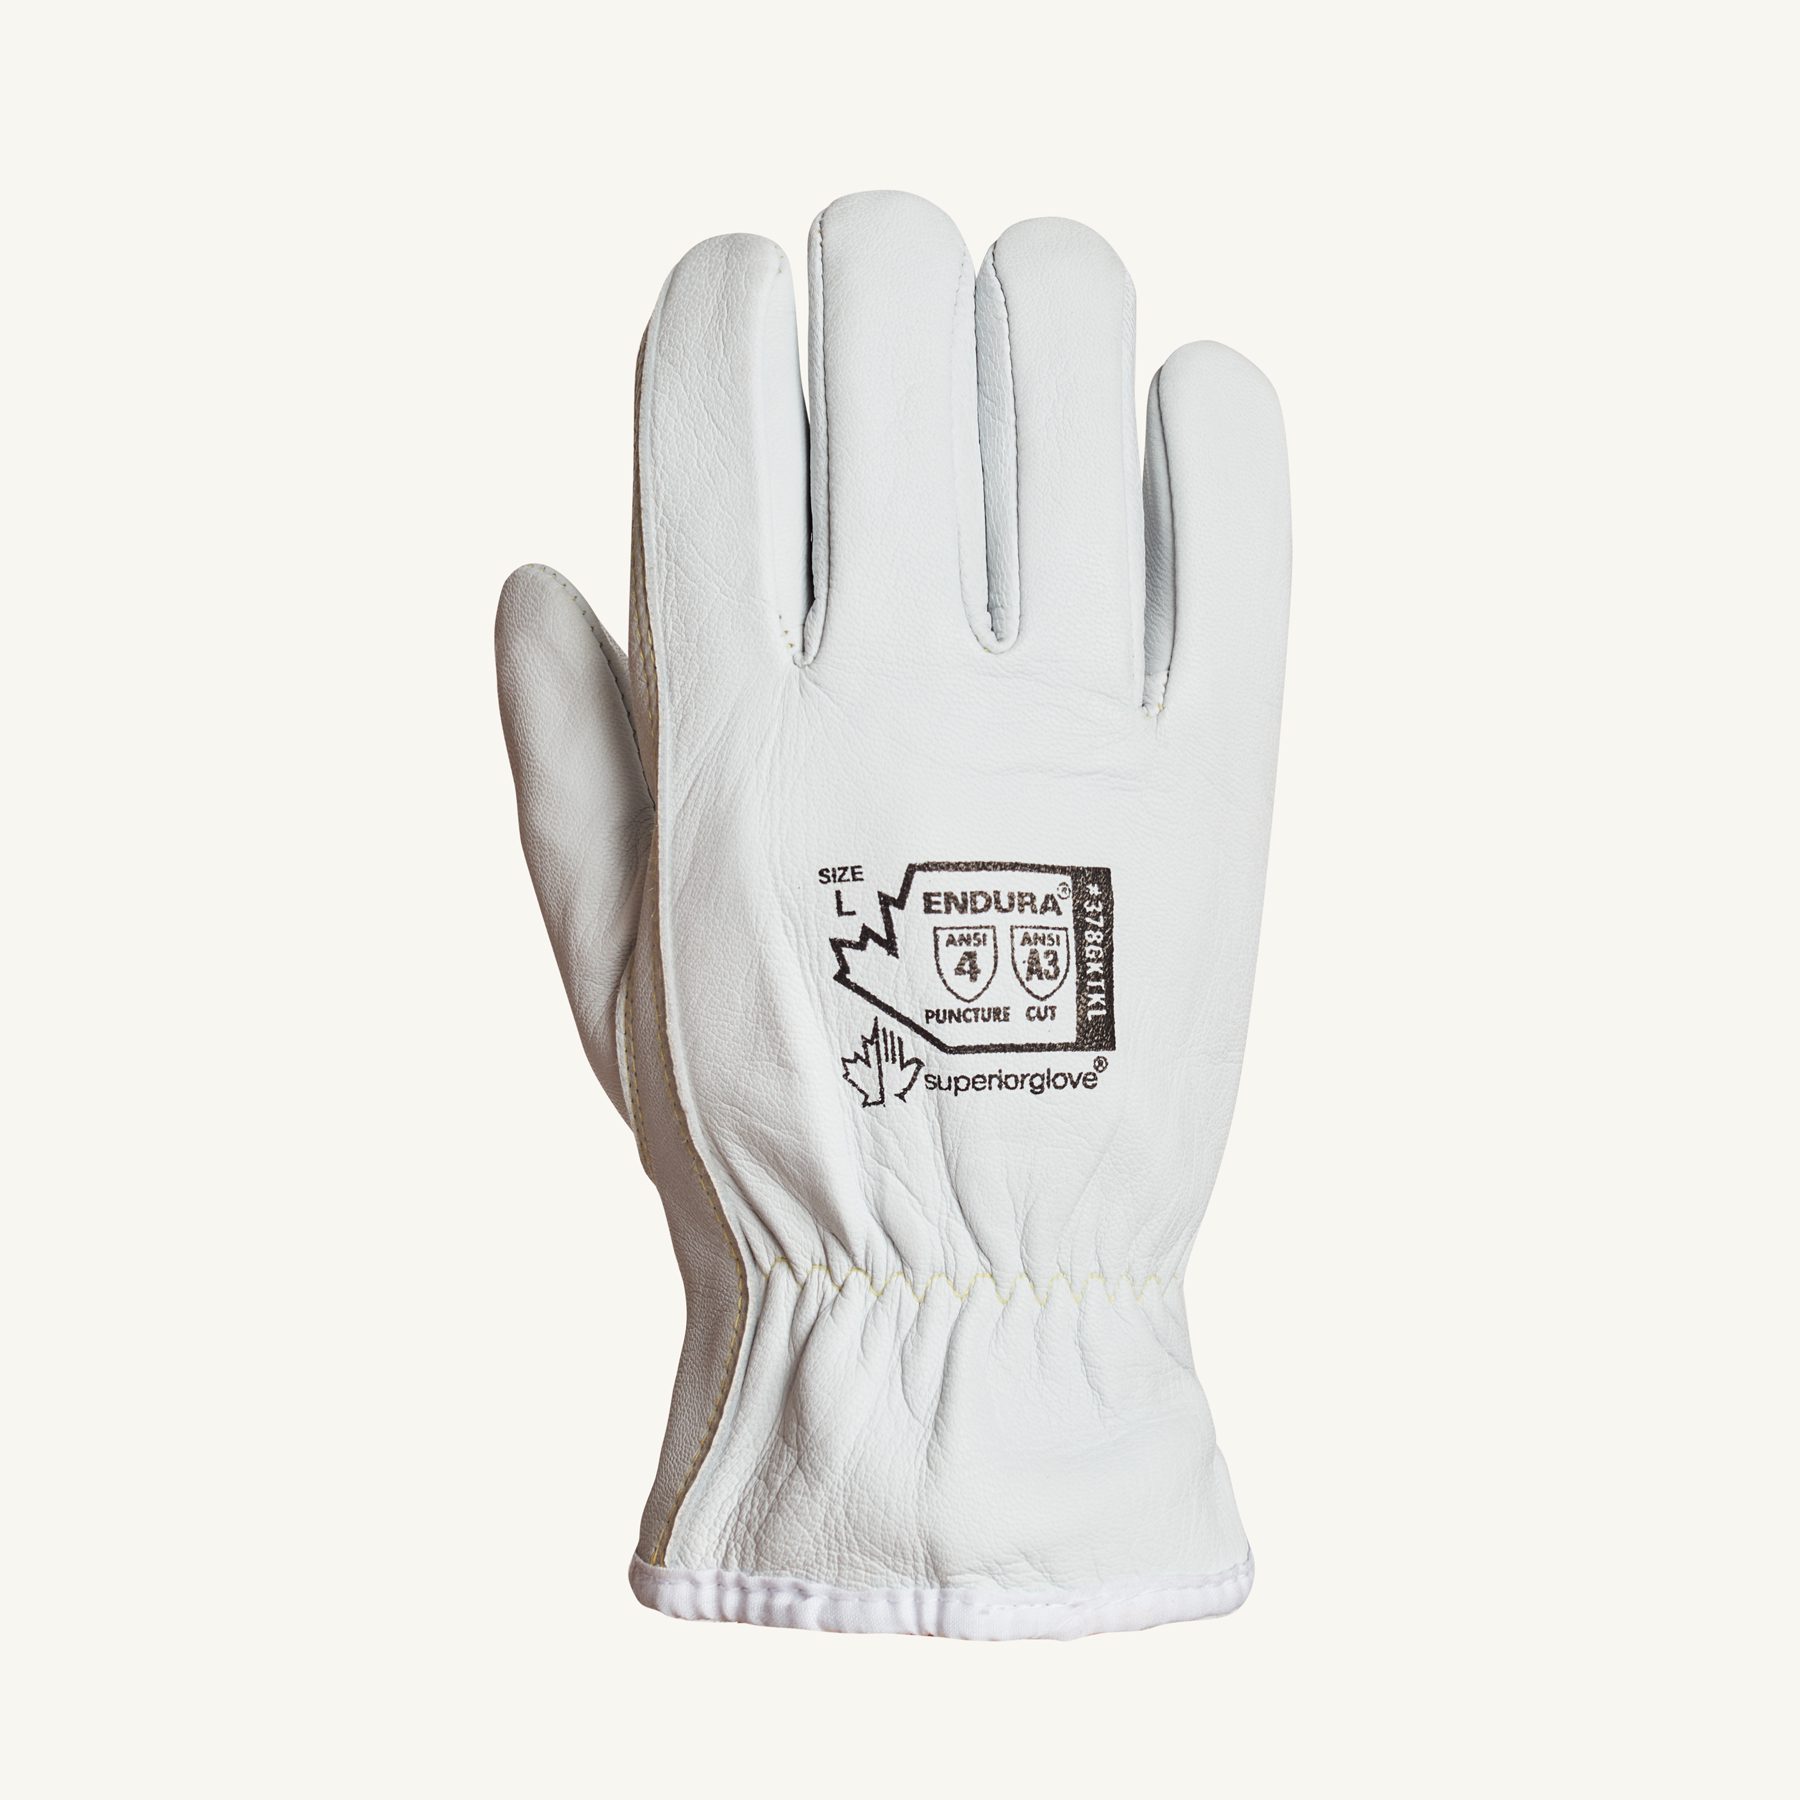 Endura® Oil Resistant Cut Level A9 Leather Driver Work Gloves, Extreme Cut  Safety Work Gloves